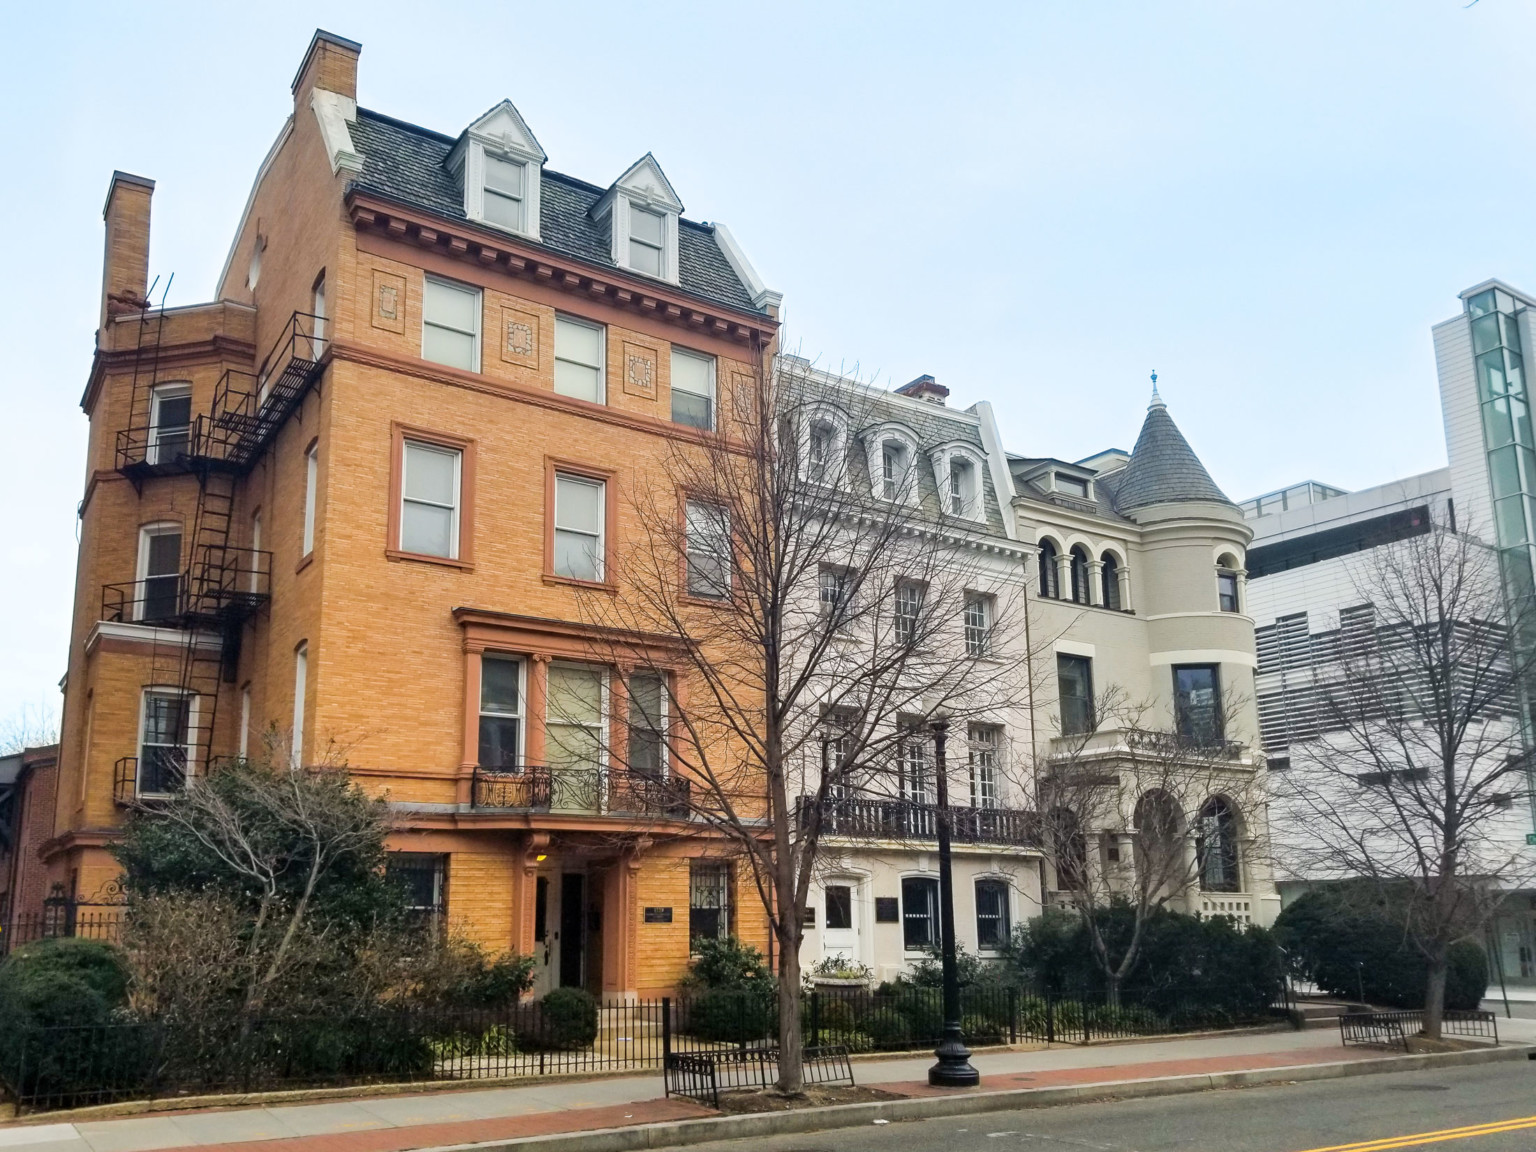 historic row houses in Washington DC, the leftmost being a warm orange revival brick façade. Turret on far right building